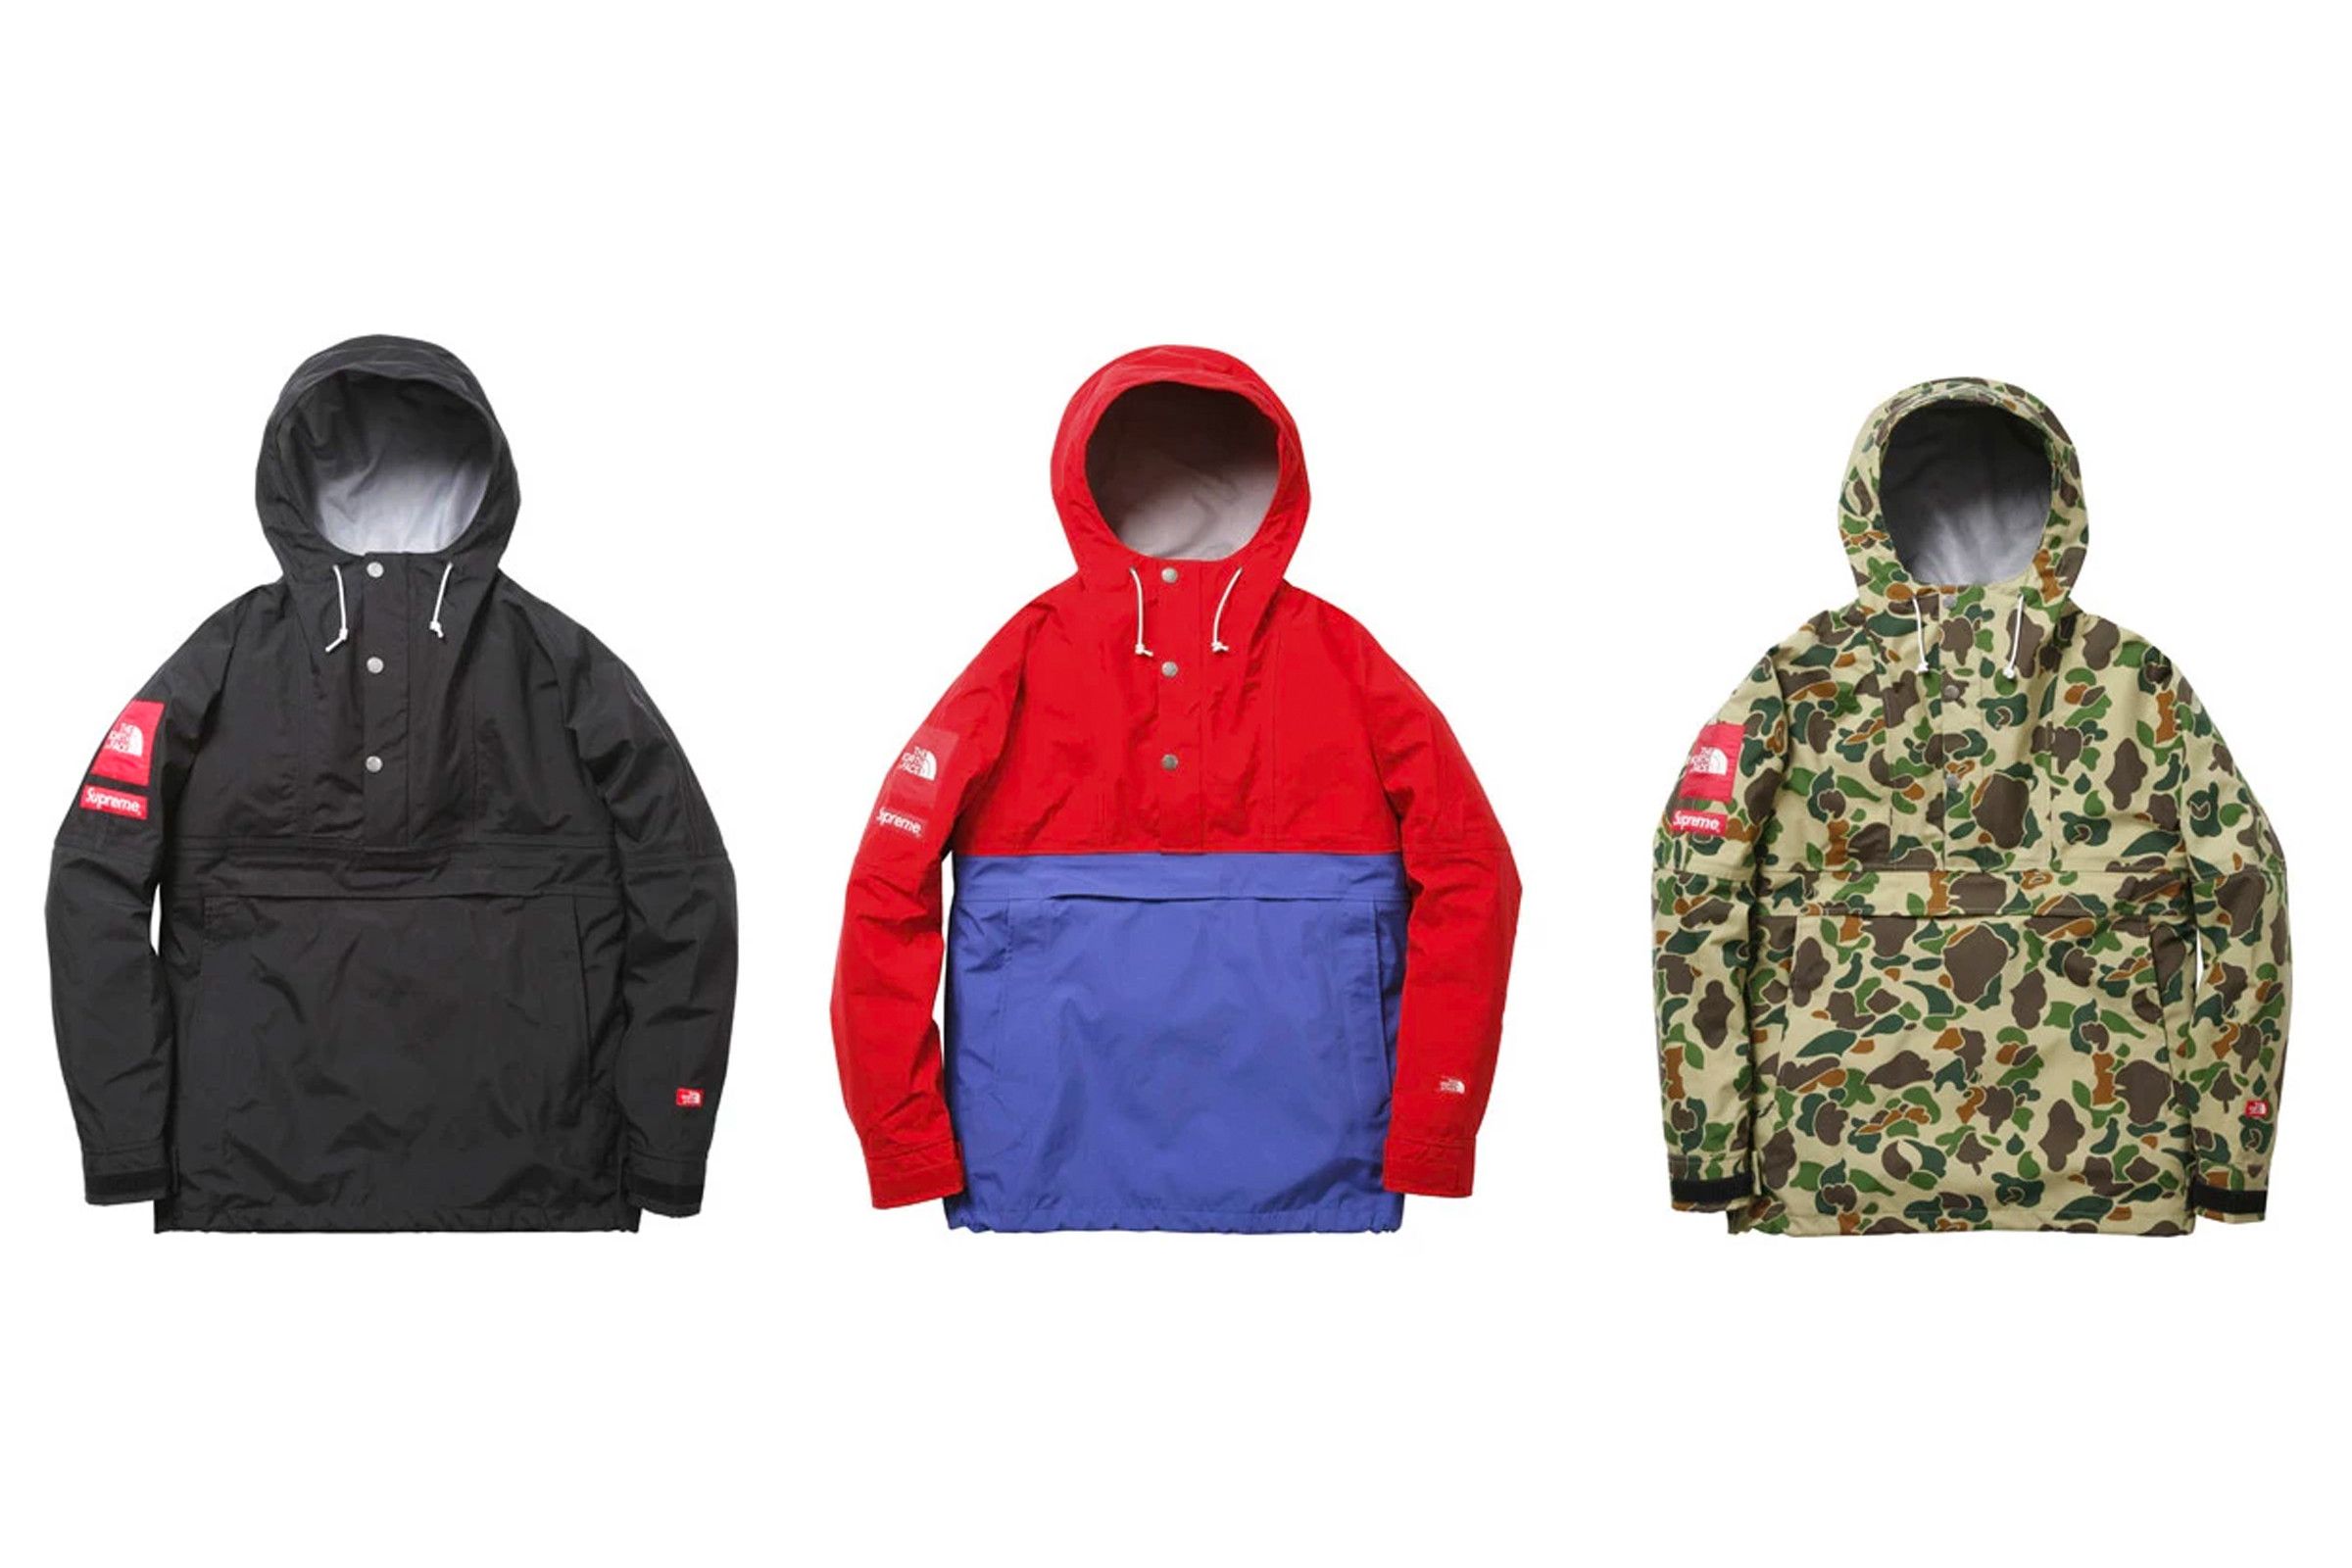 Supreme F/W 2017 The North Face Mountain Expedition Backpack Box